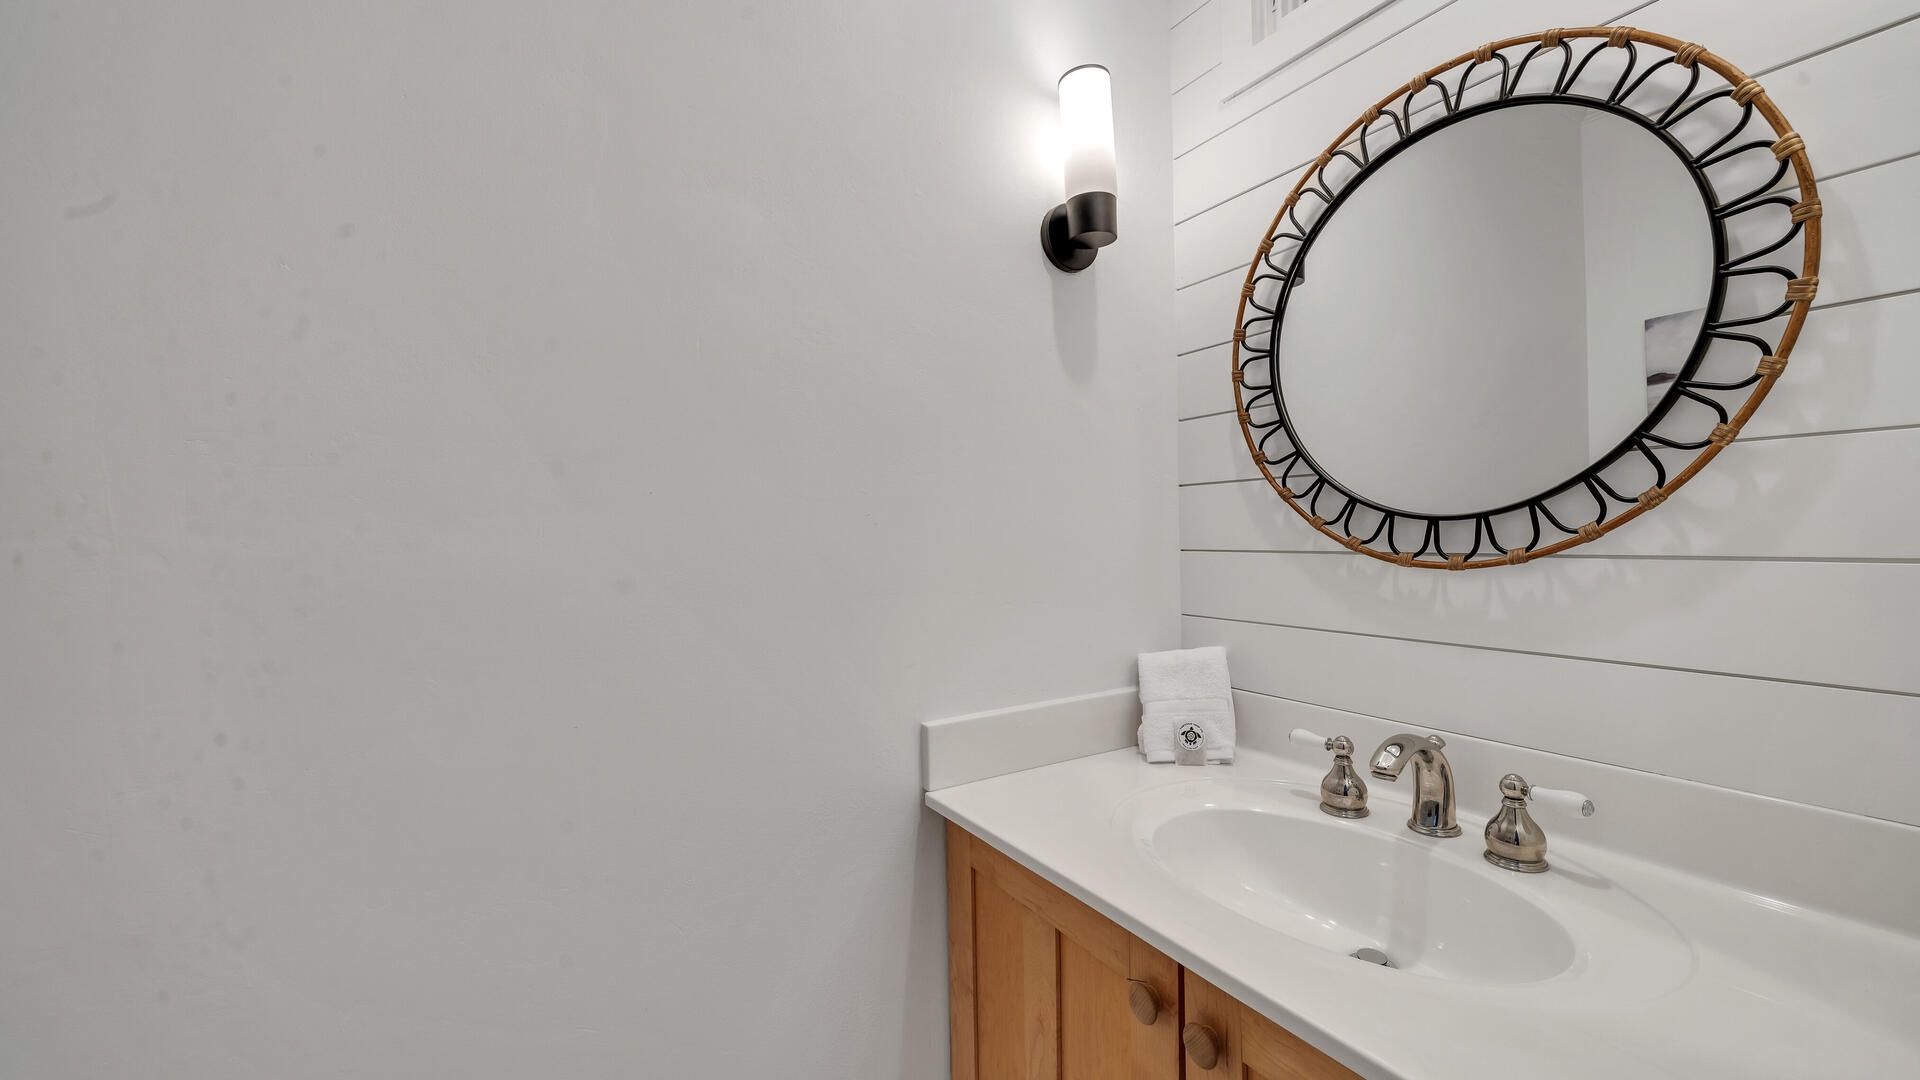 A convenient half-bath is located just off the main living space!